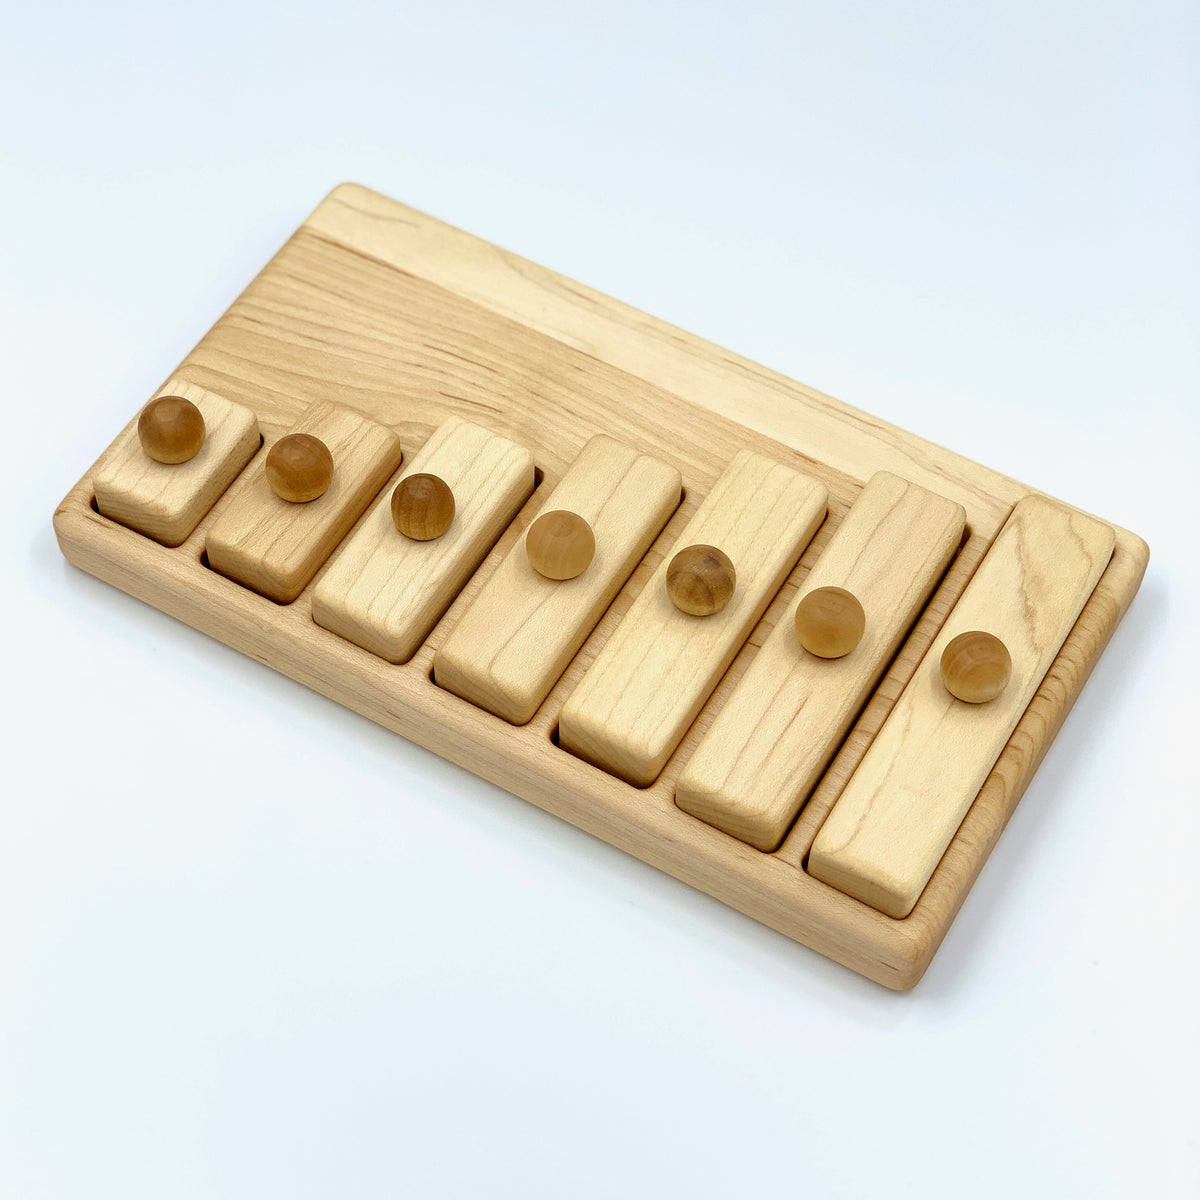 TO BE DISCONTINUED: Bars Puzzle